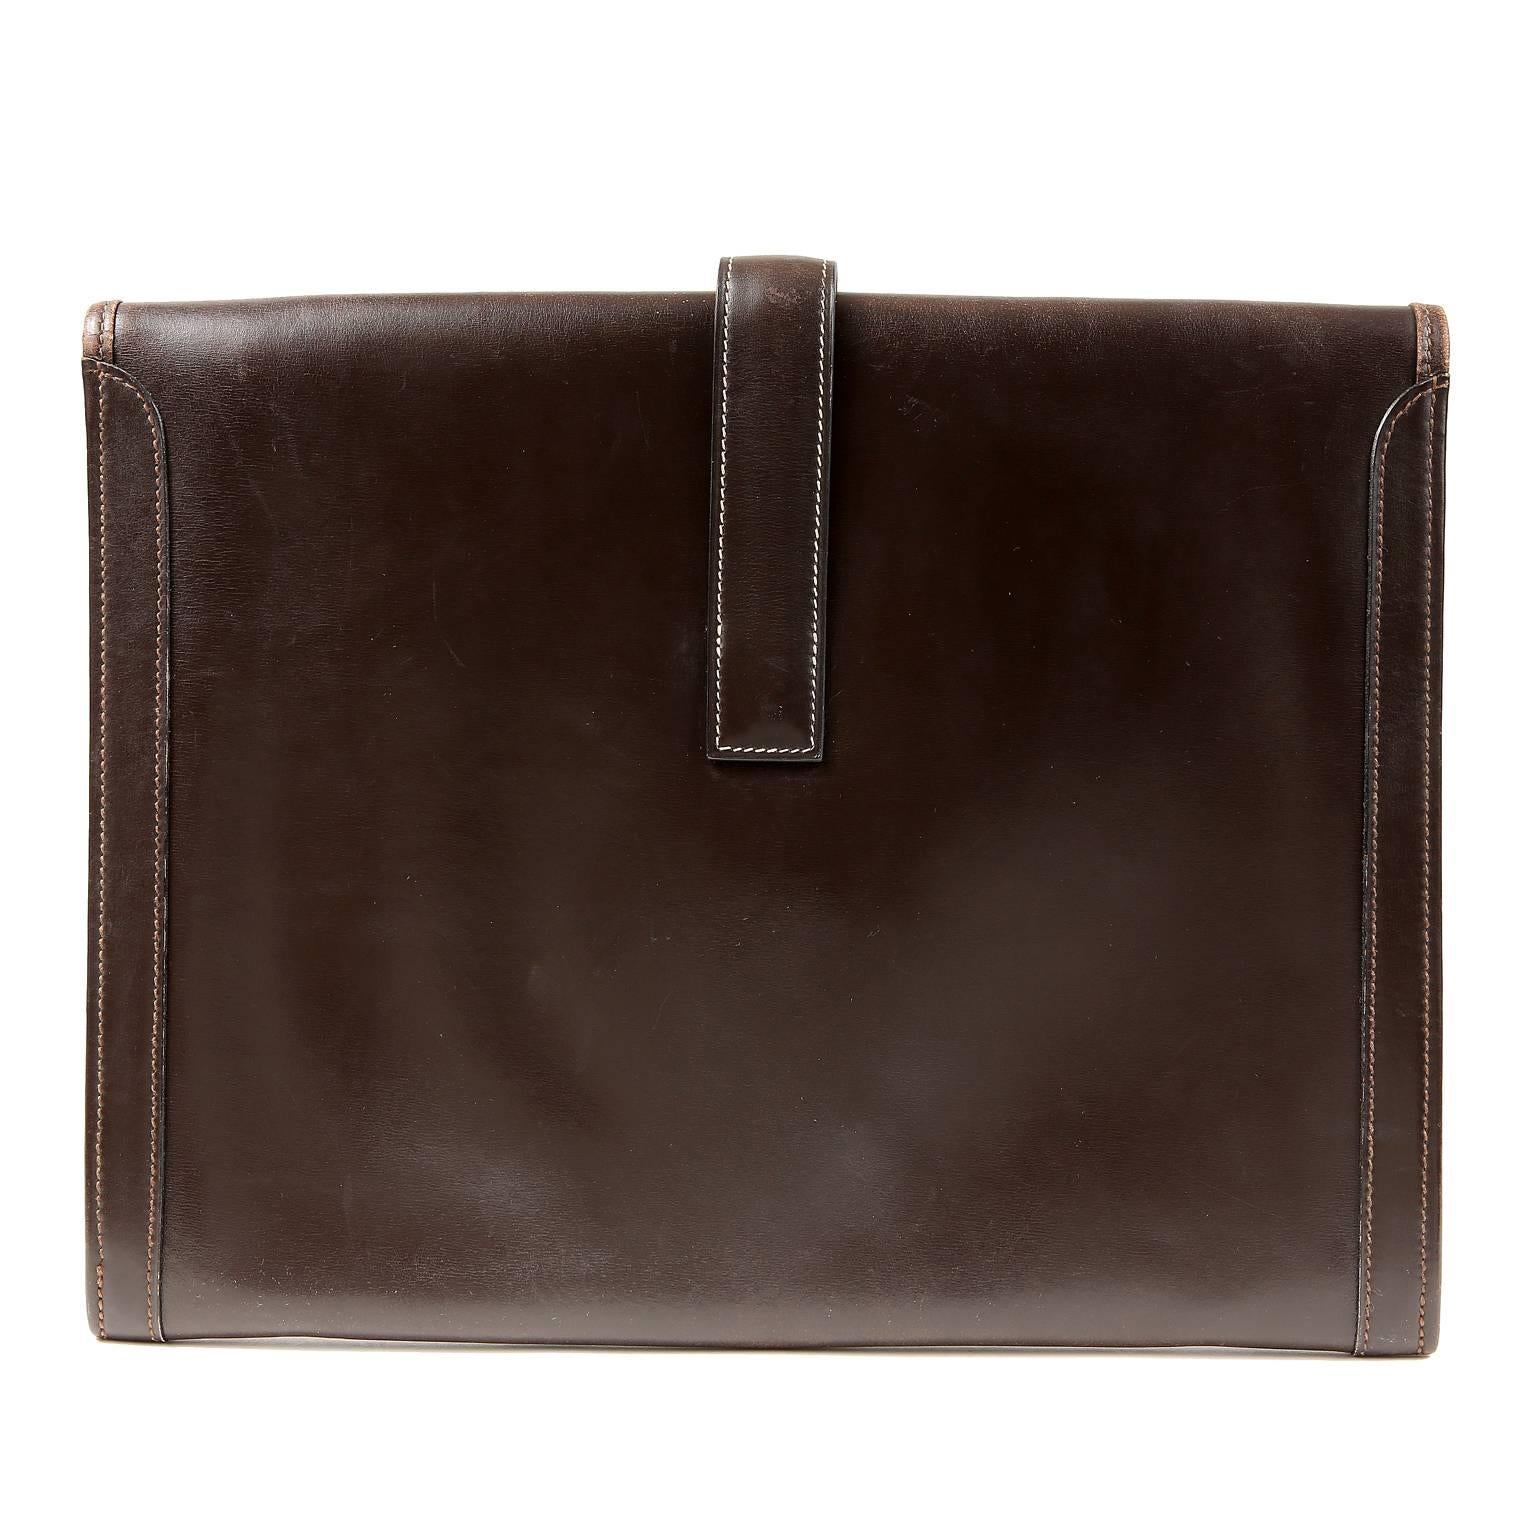 Hermès Espresso Box Calf Jumbo Jige Clutch- Excellent Condition
  The unisex style is perfect for carrying documents as well as personal belongings. 

Deep Espresso Brown box calf leather has a fine-grained texture and is accented with white